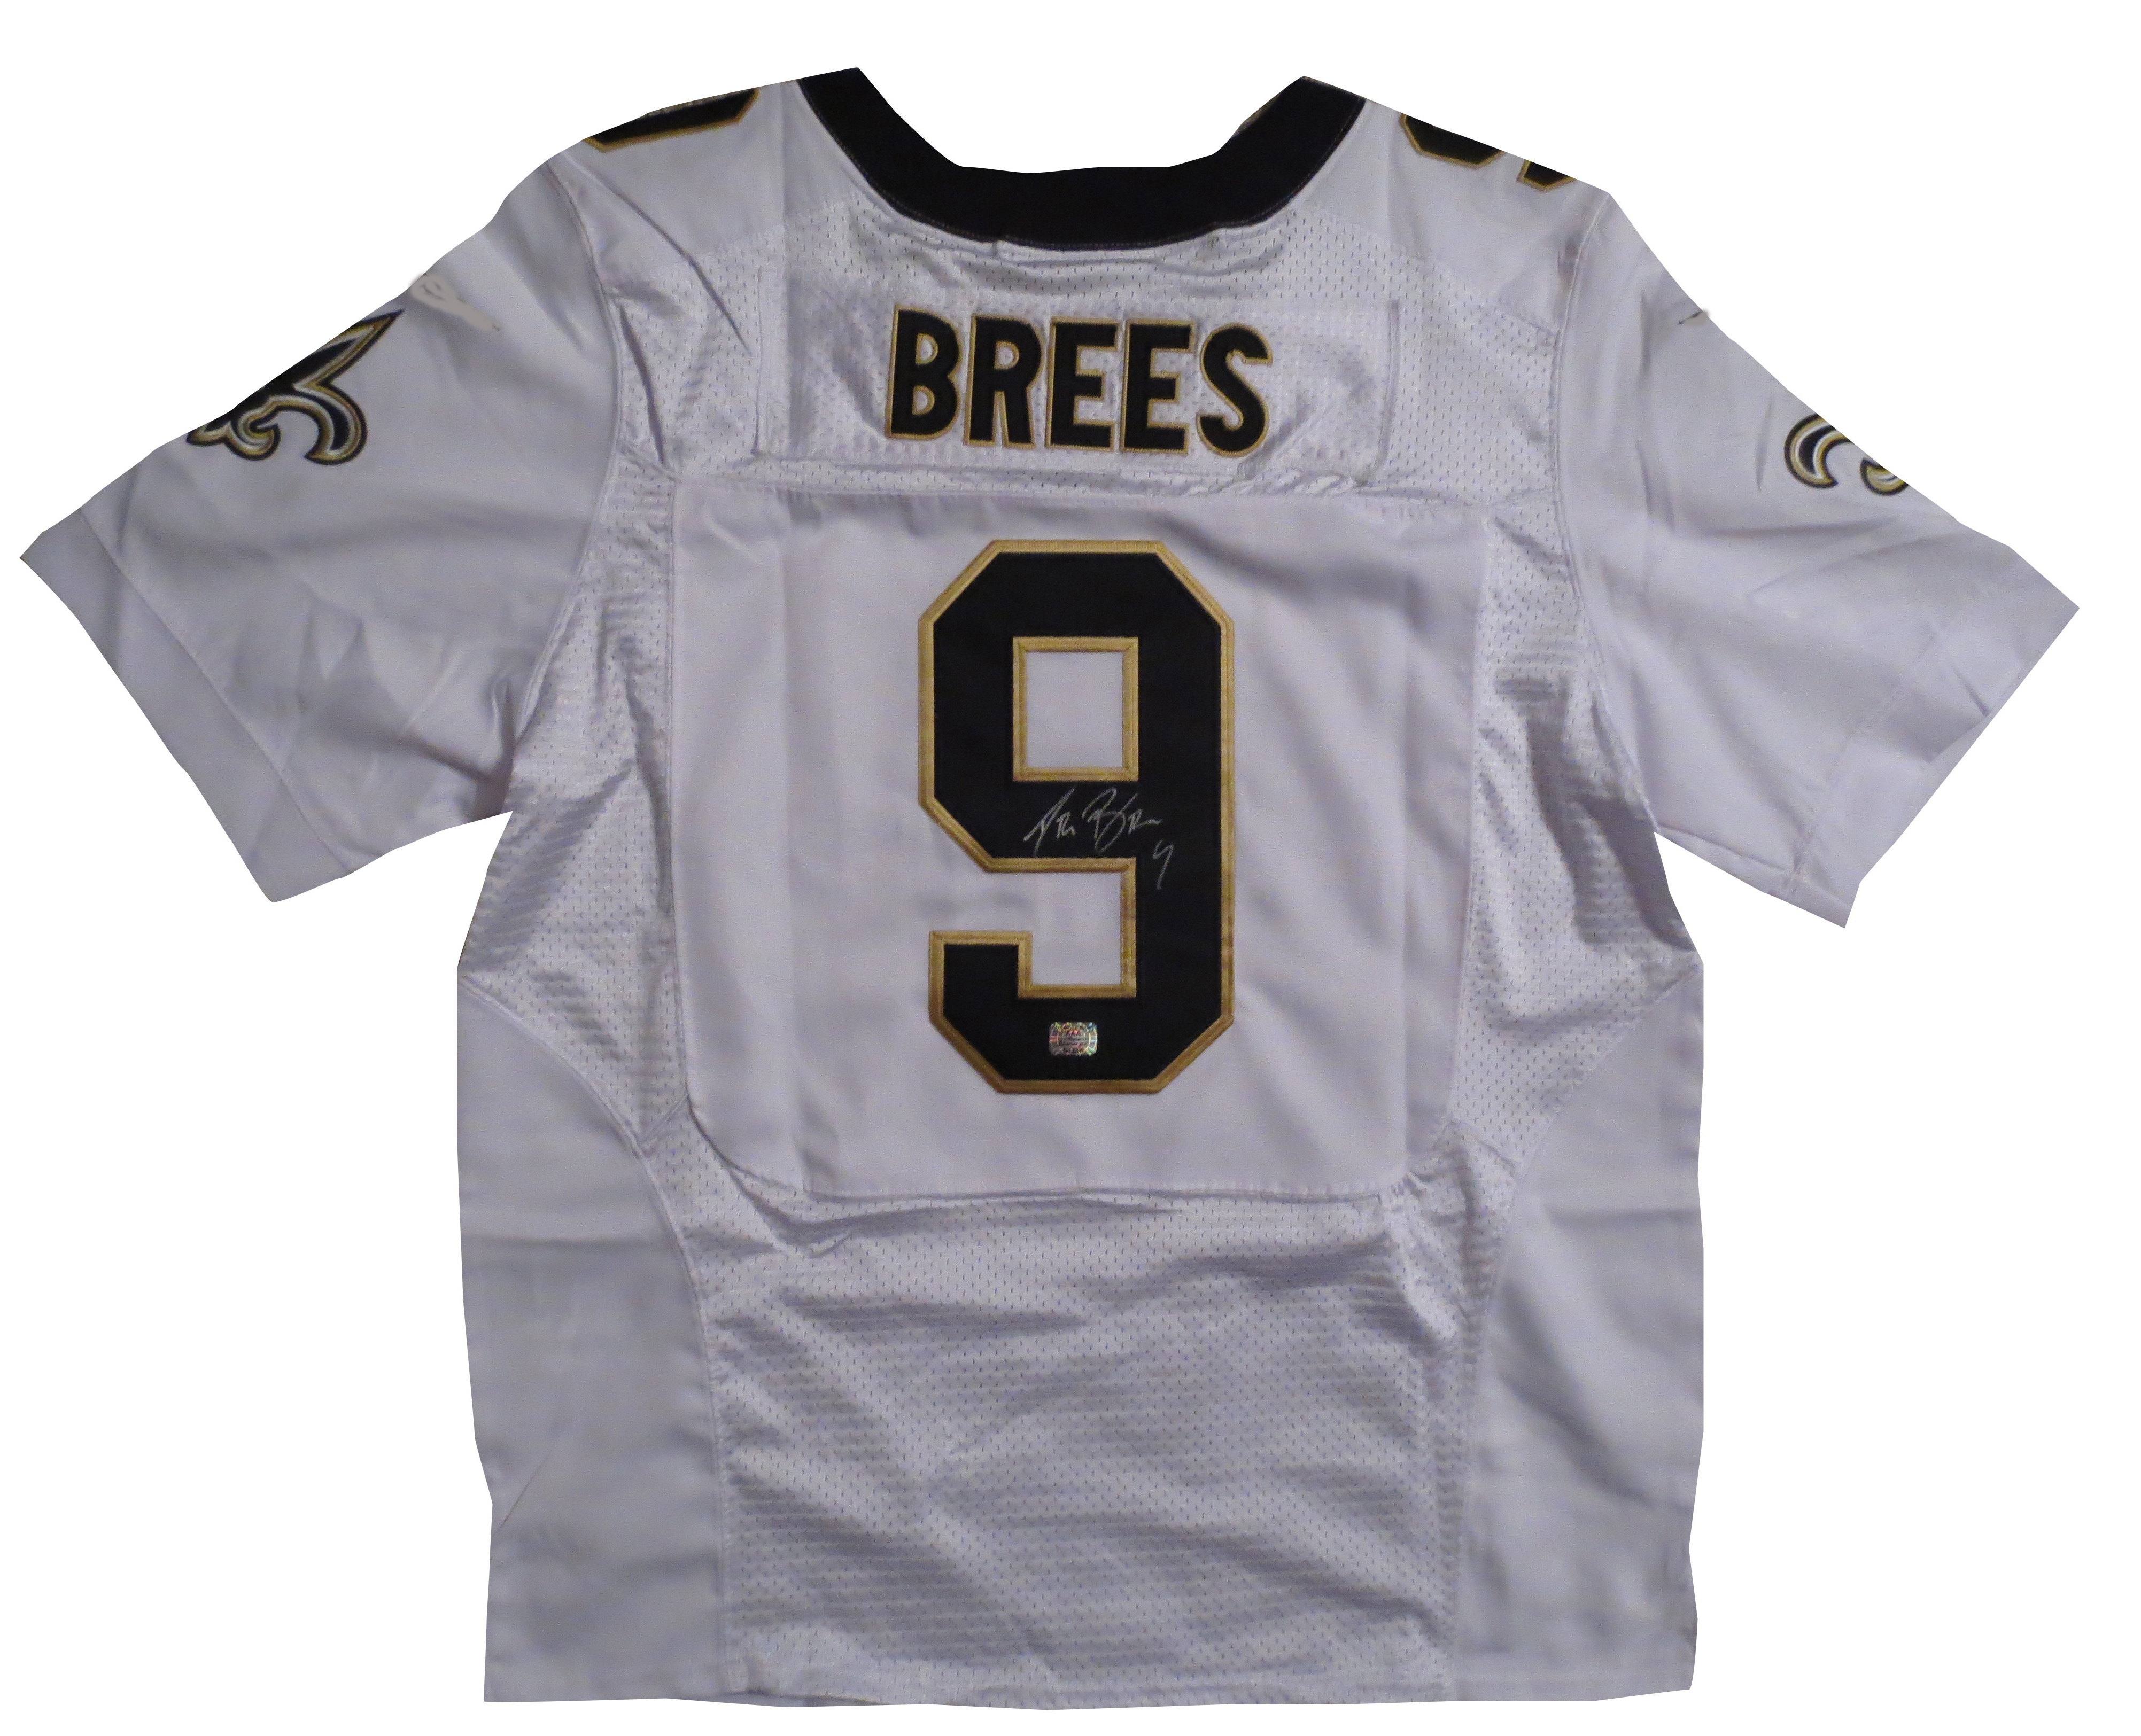 drew brees signed jersey